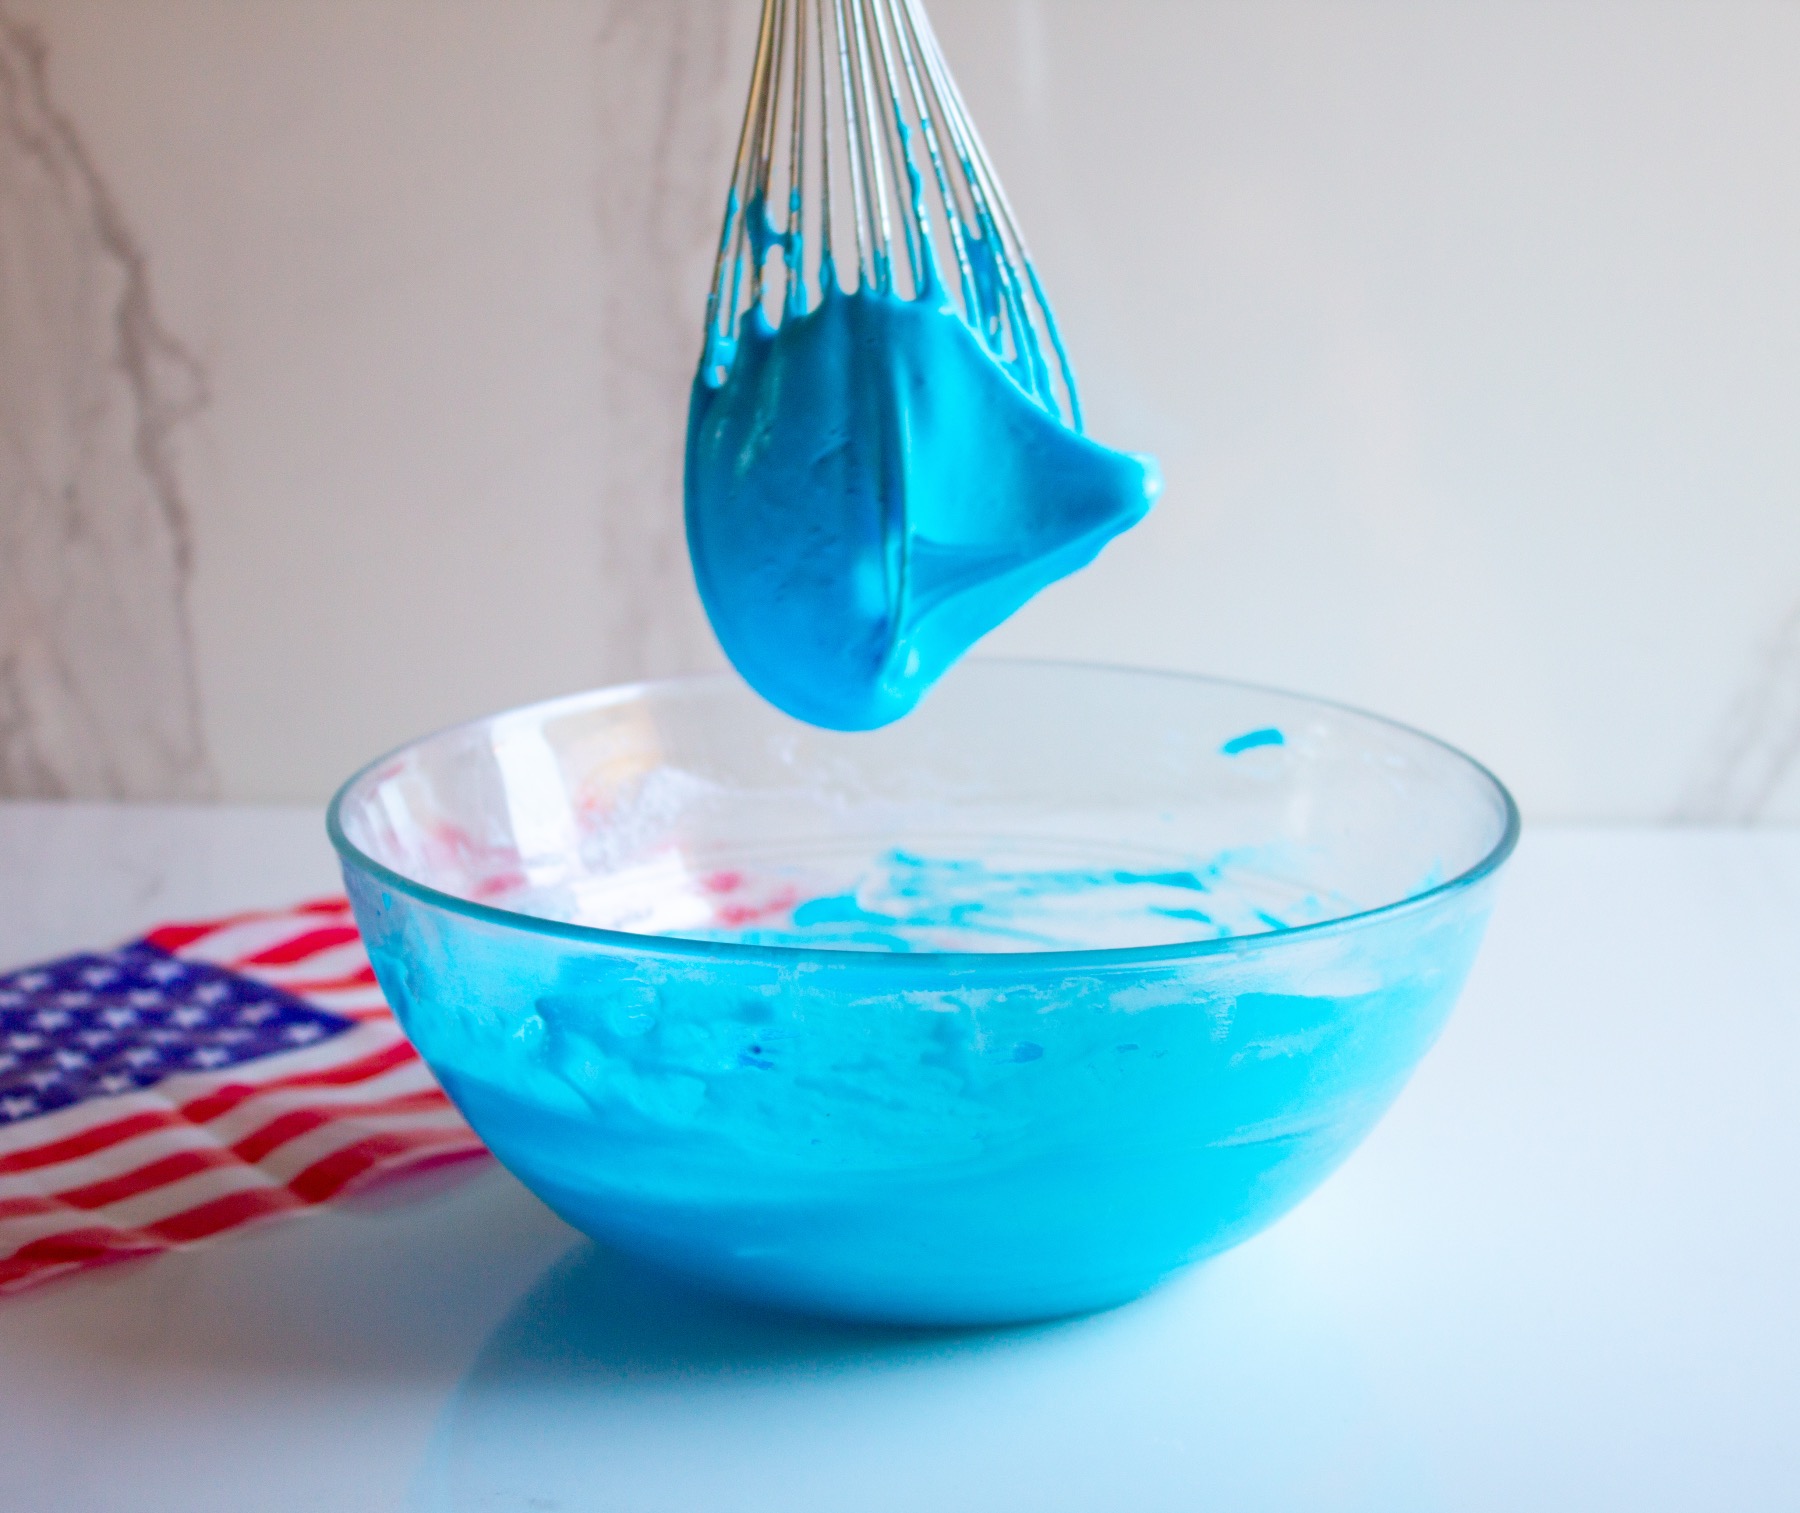 whip the egg whites with blue food coloring